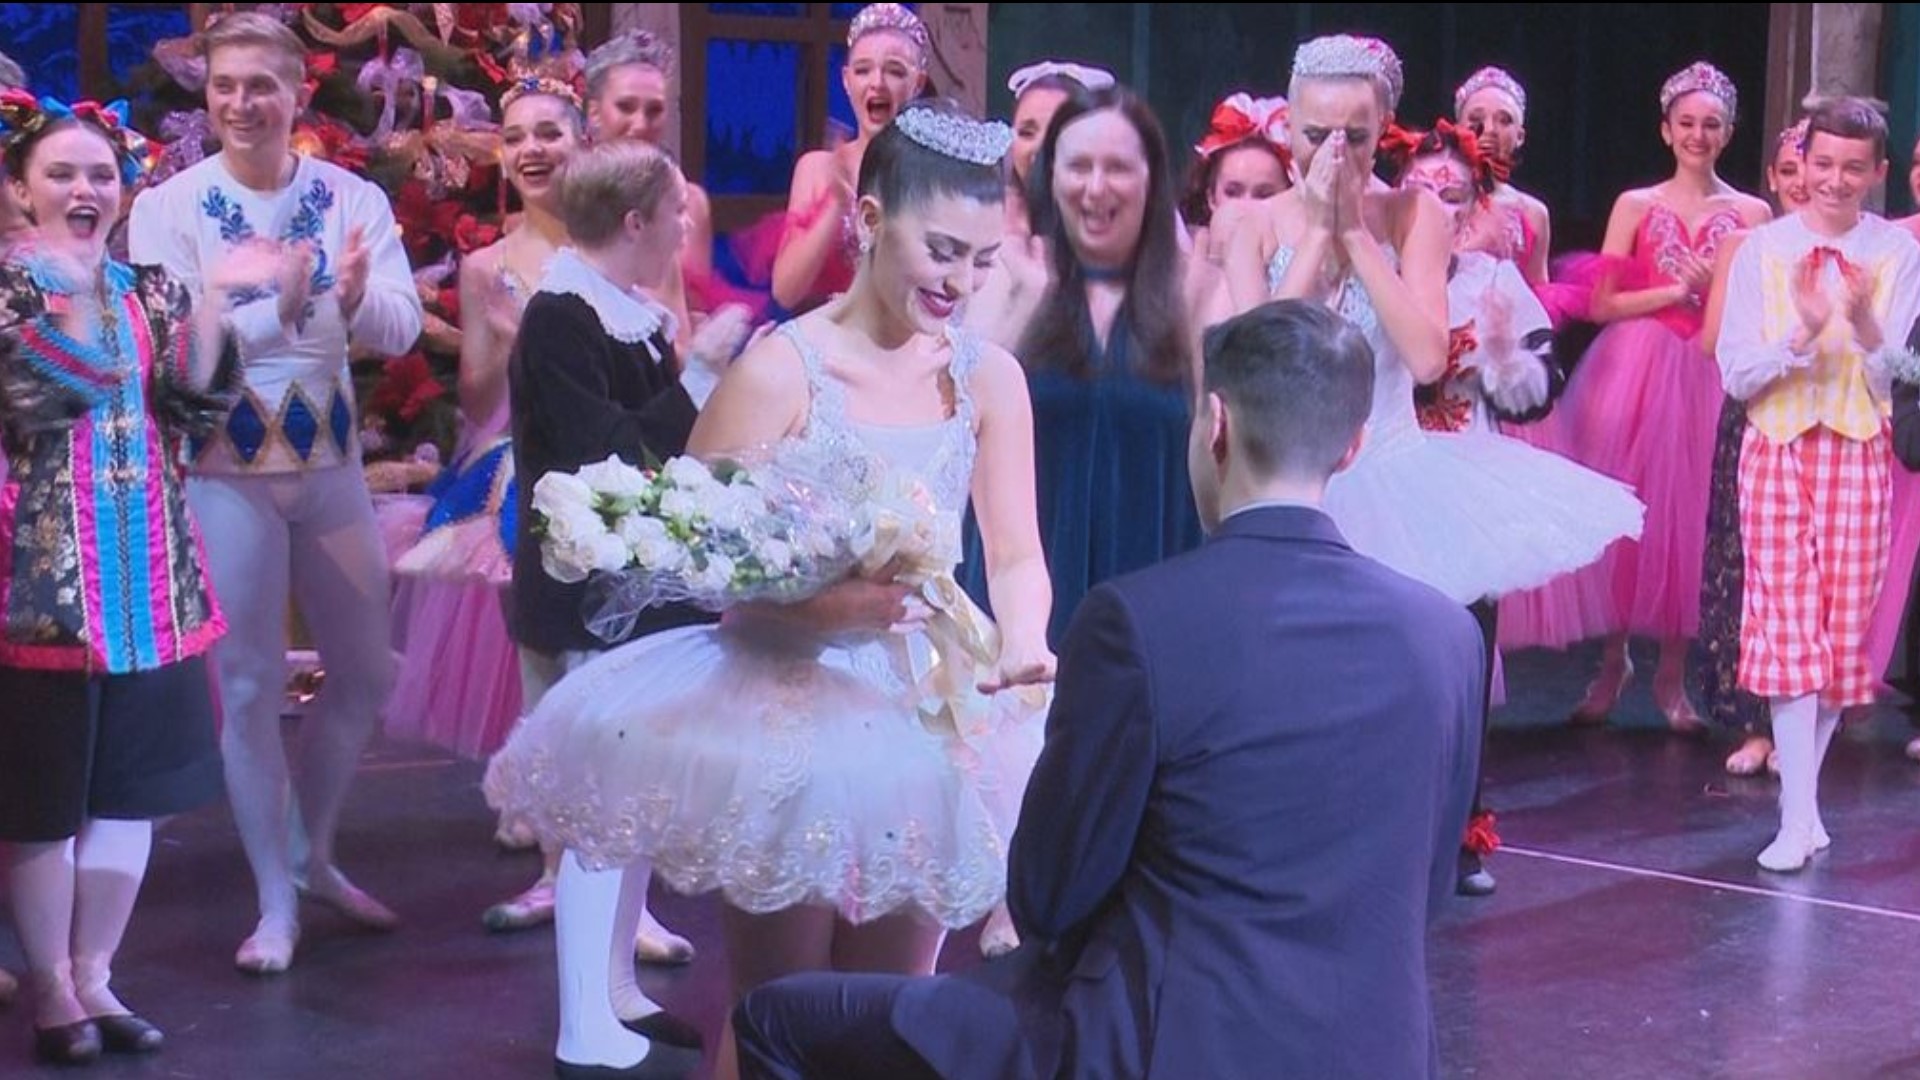 A Jacksonville ballerina got the proposal of her dreams after her final performance in the Nutcracker.